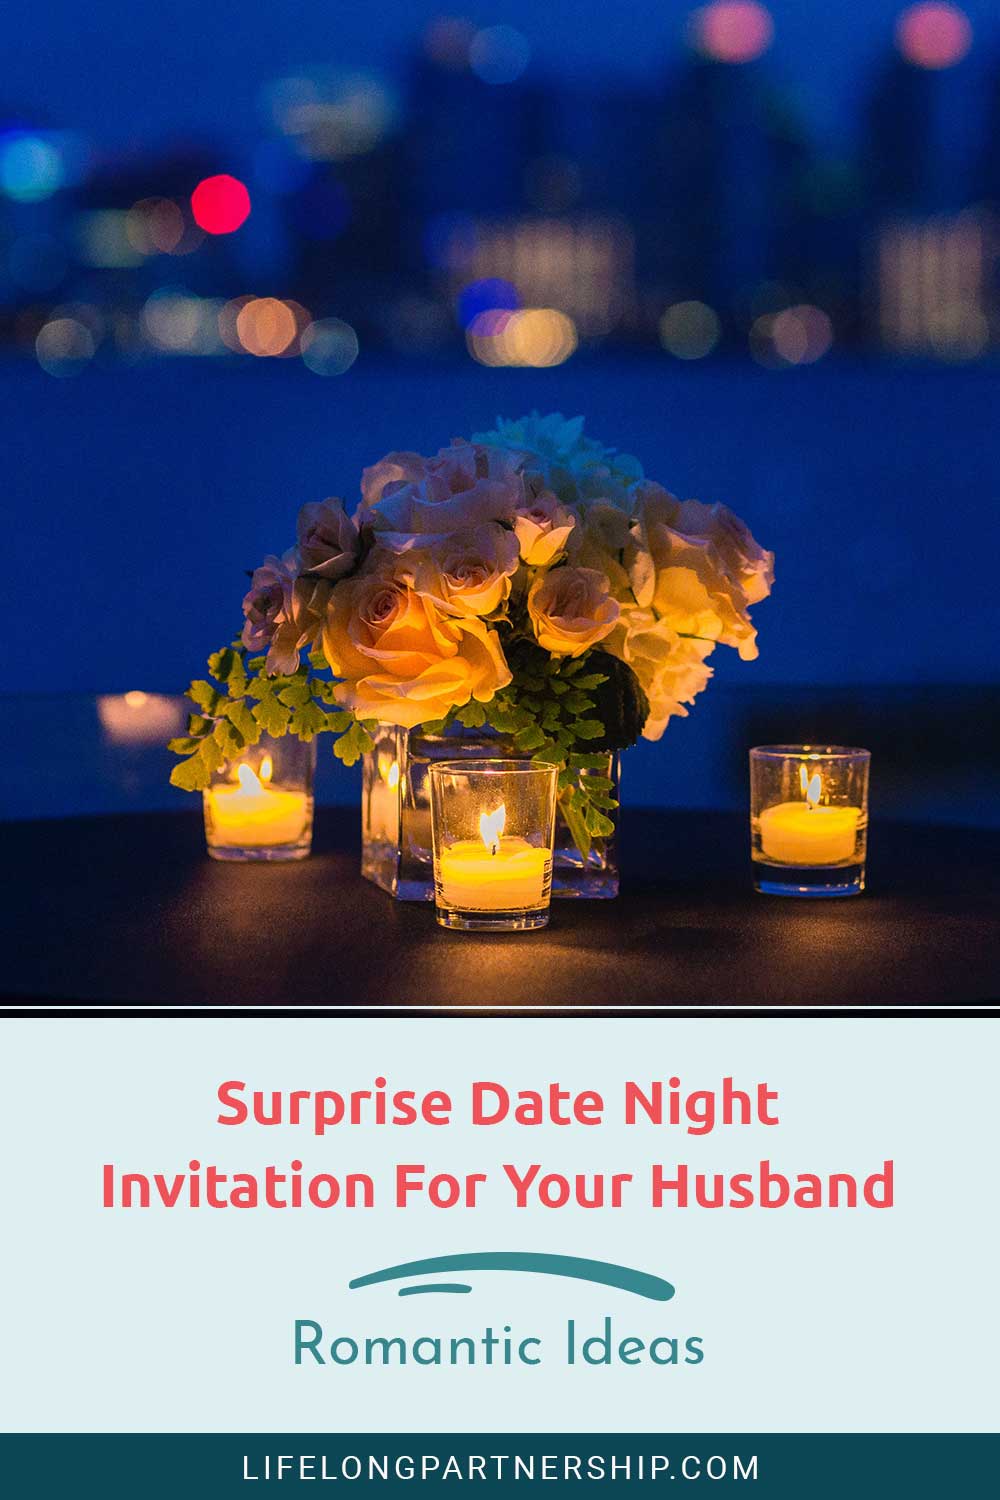 Surprise Date Night Invitation For Your Husband – Romantic Ideas